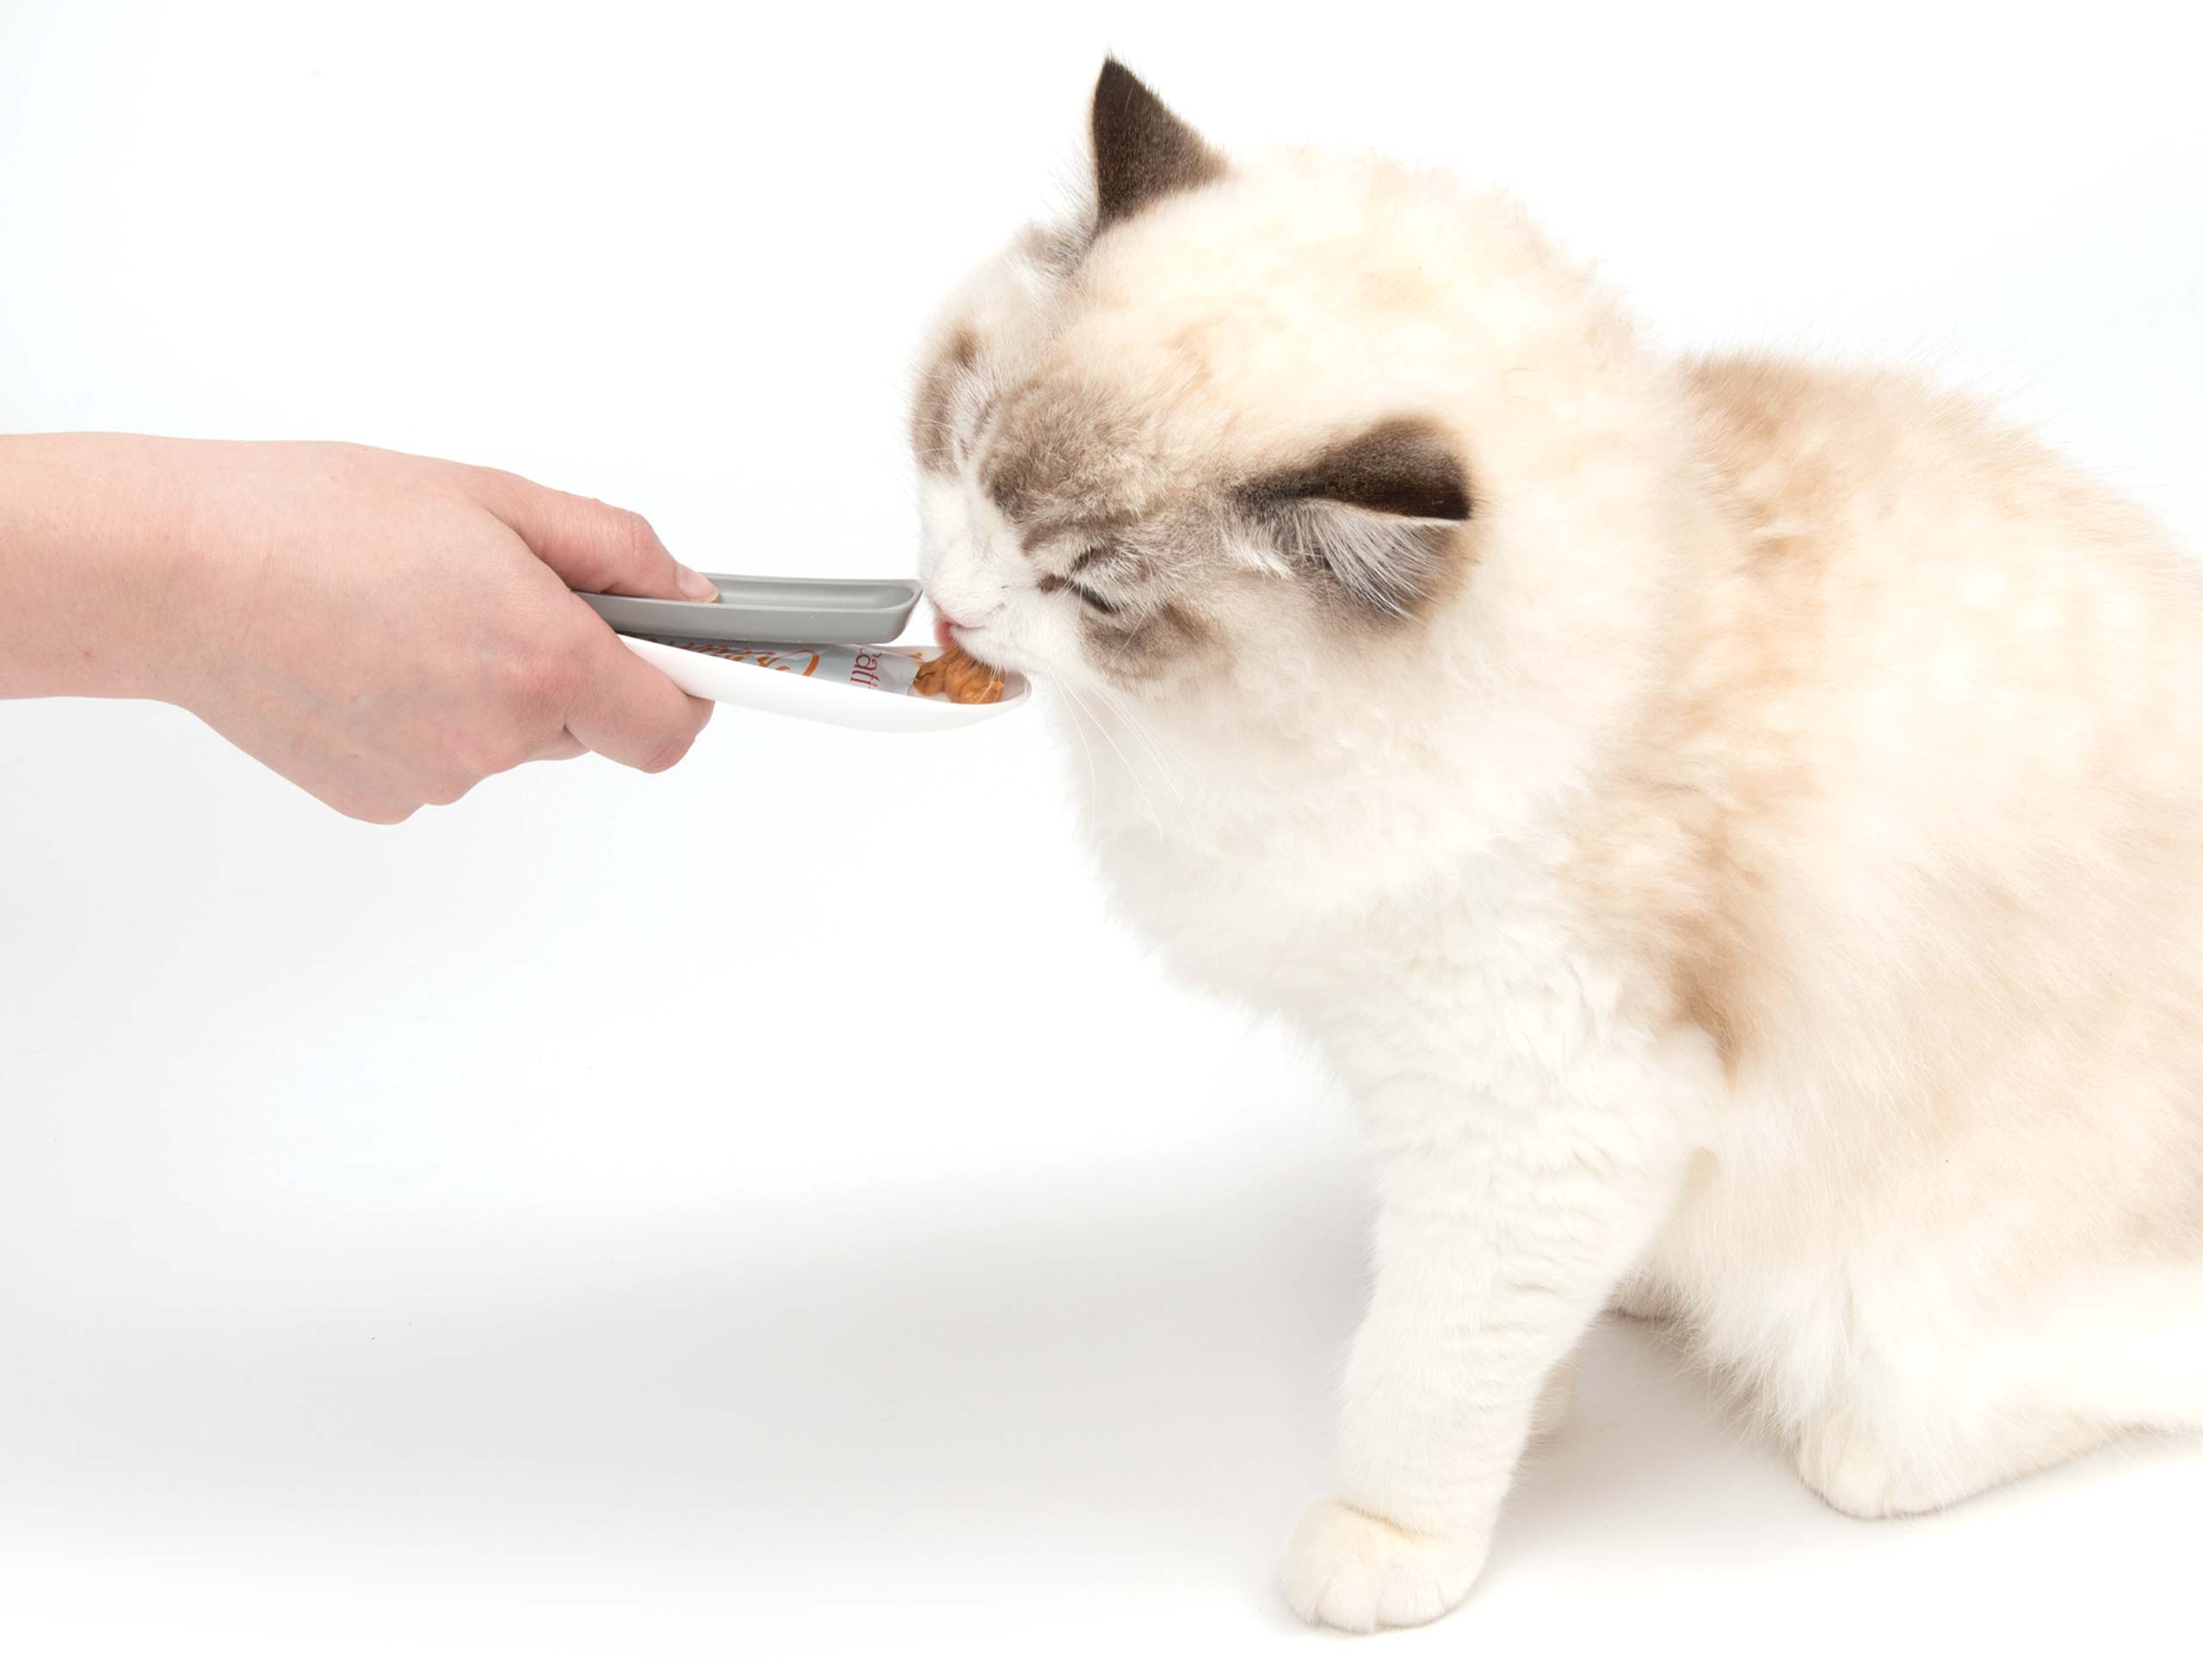 Cat licking creamy from the Catit creamy spoon